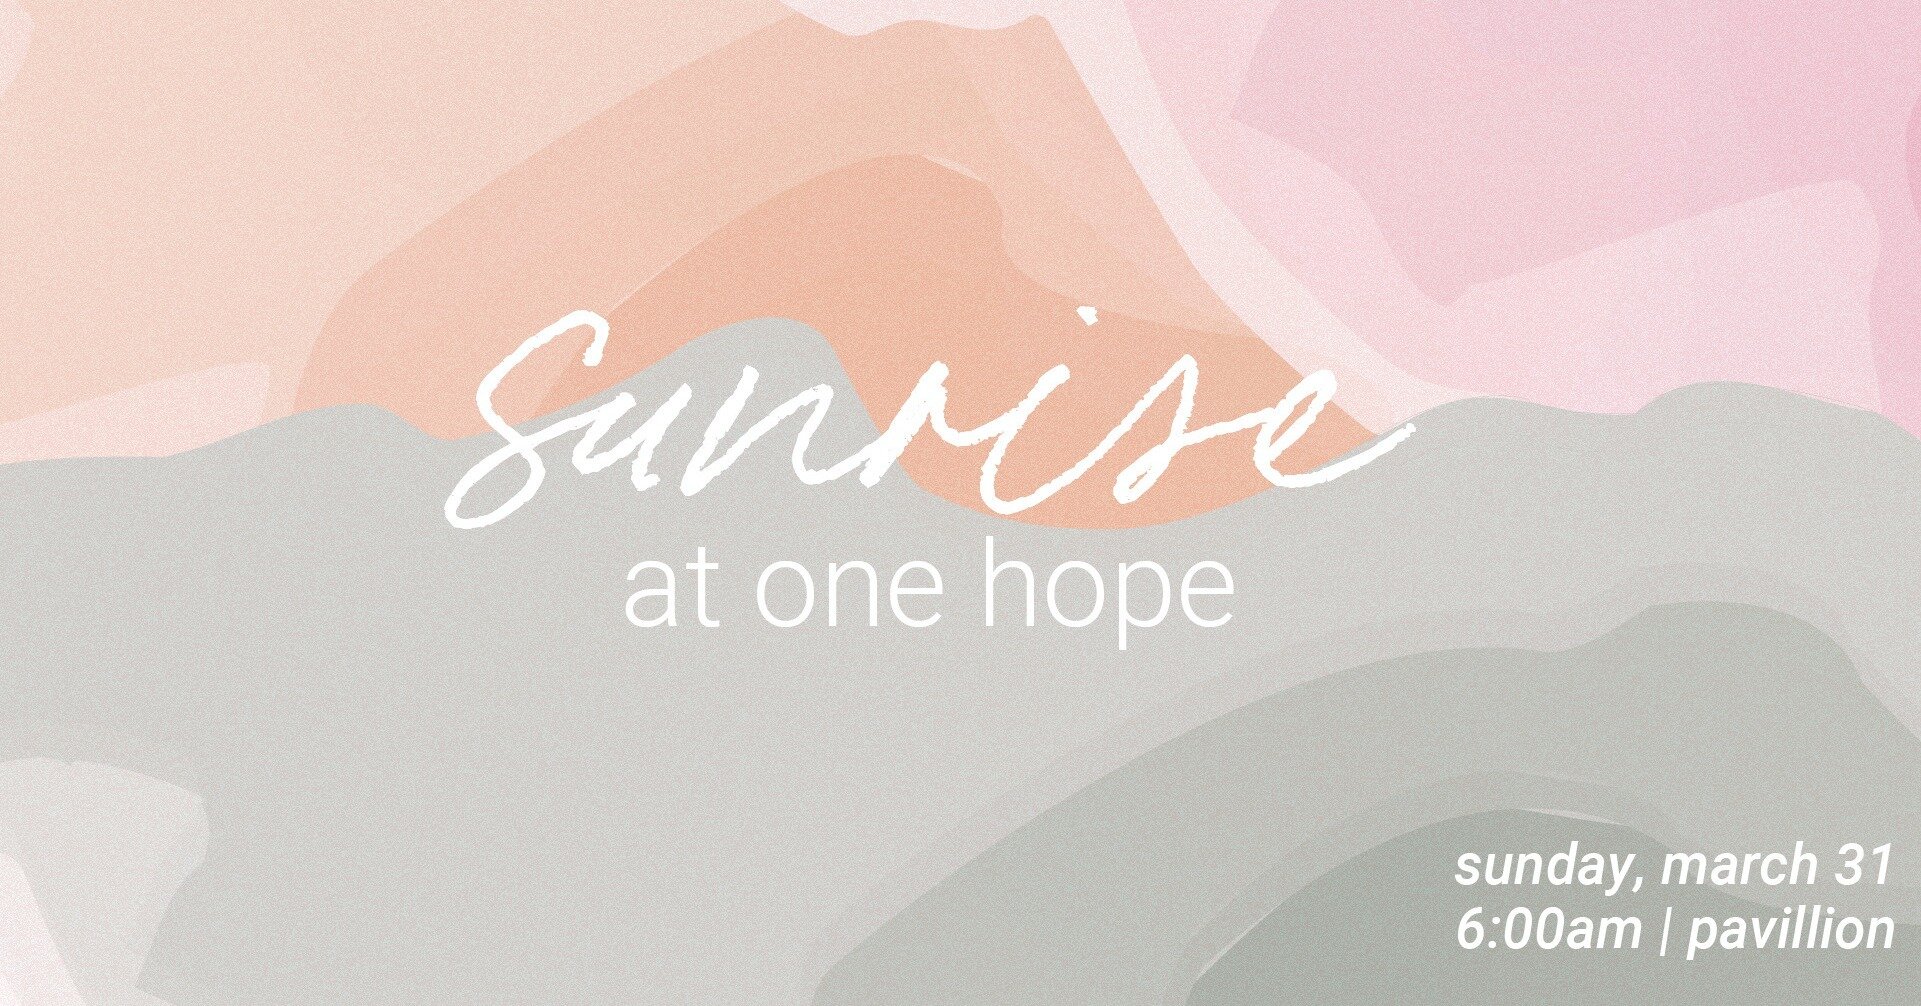 Start your Easter Sunday celebration off at One Hope's Sunrise service. Together, we'll witness the beauty of a new day, symbolizing the triumph of light over darkness! Easter Sunday, March 31, at 6:00am - One Hope Pavilion.